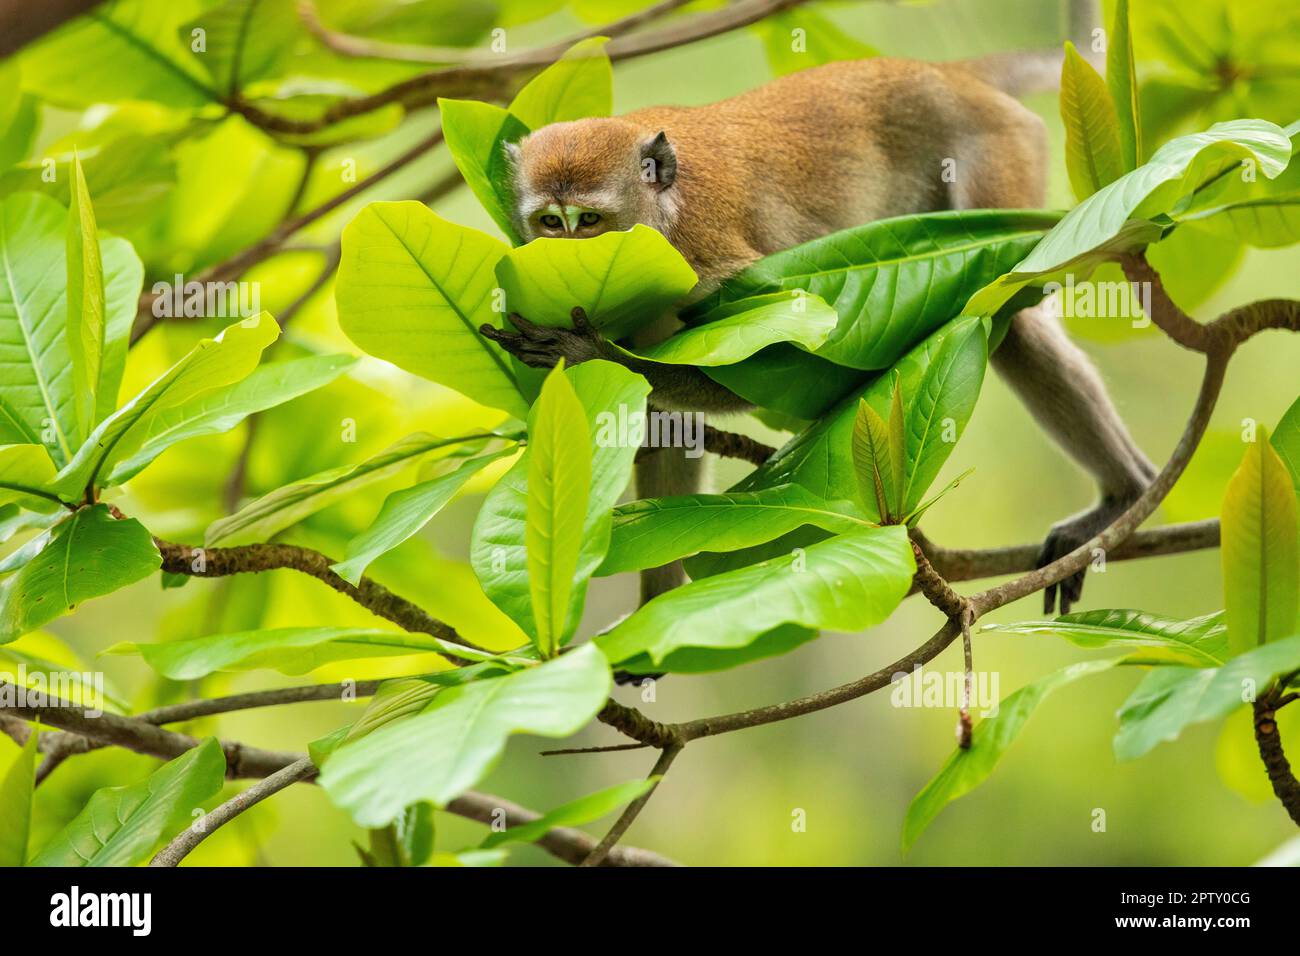 Long tailed macaque face palms a sea almond leaf while foraging along a mangrove river, Singapore Stock Photo